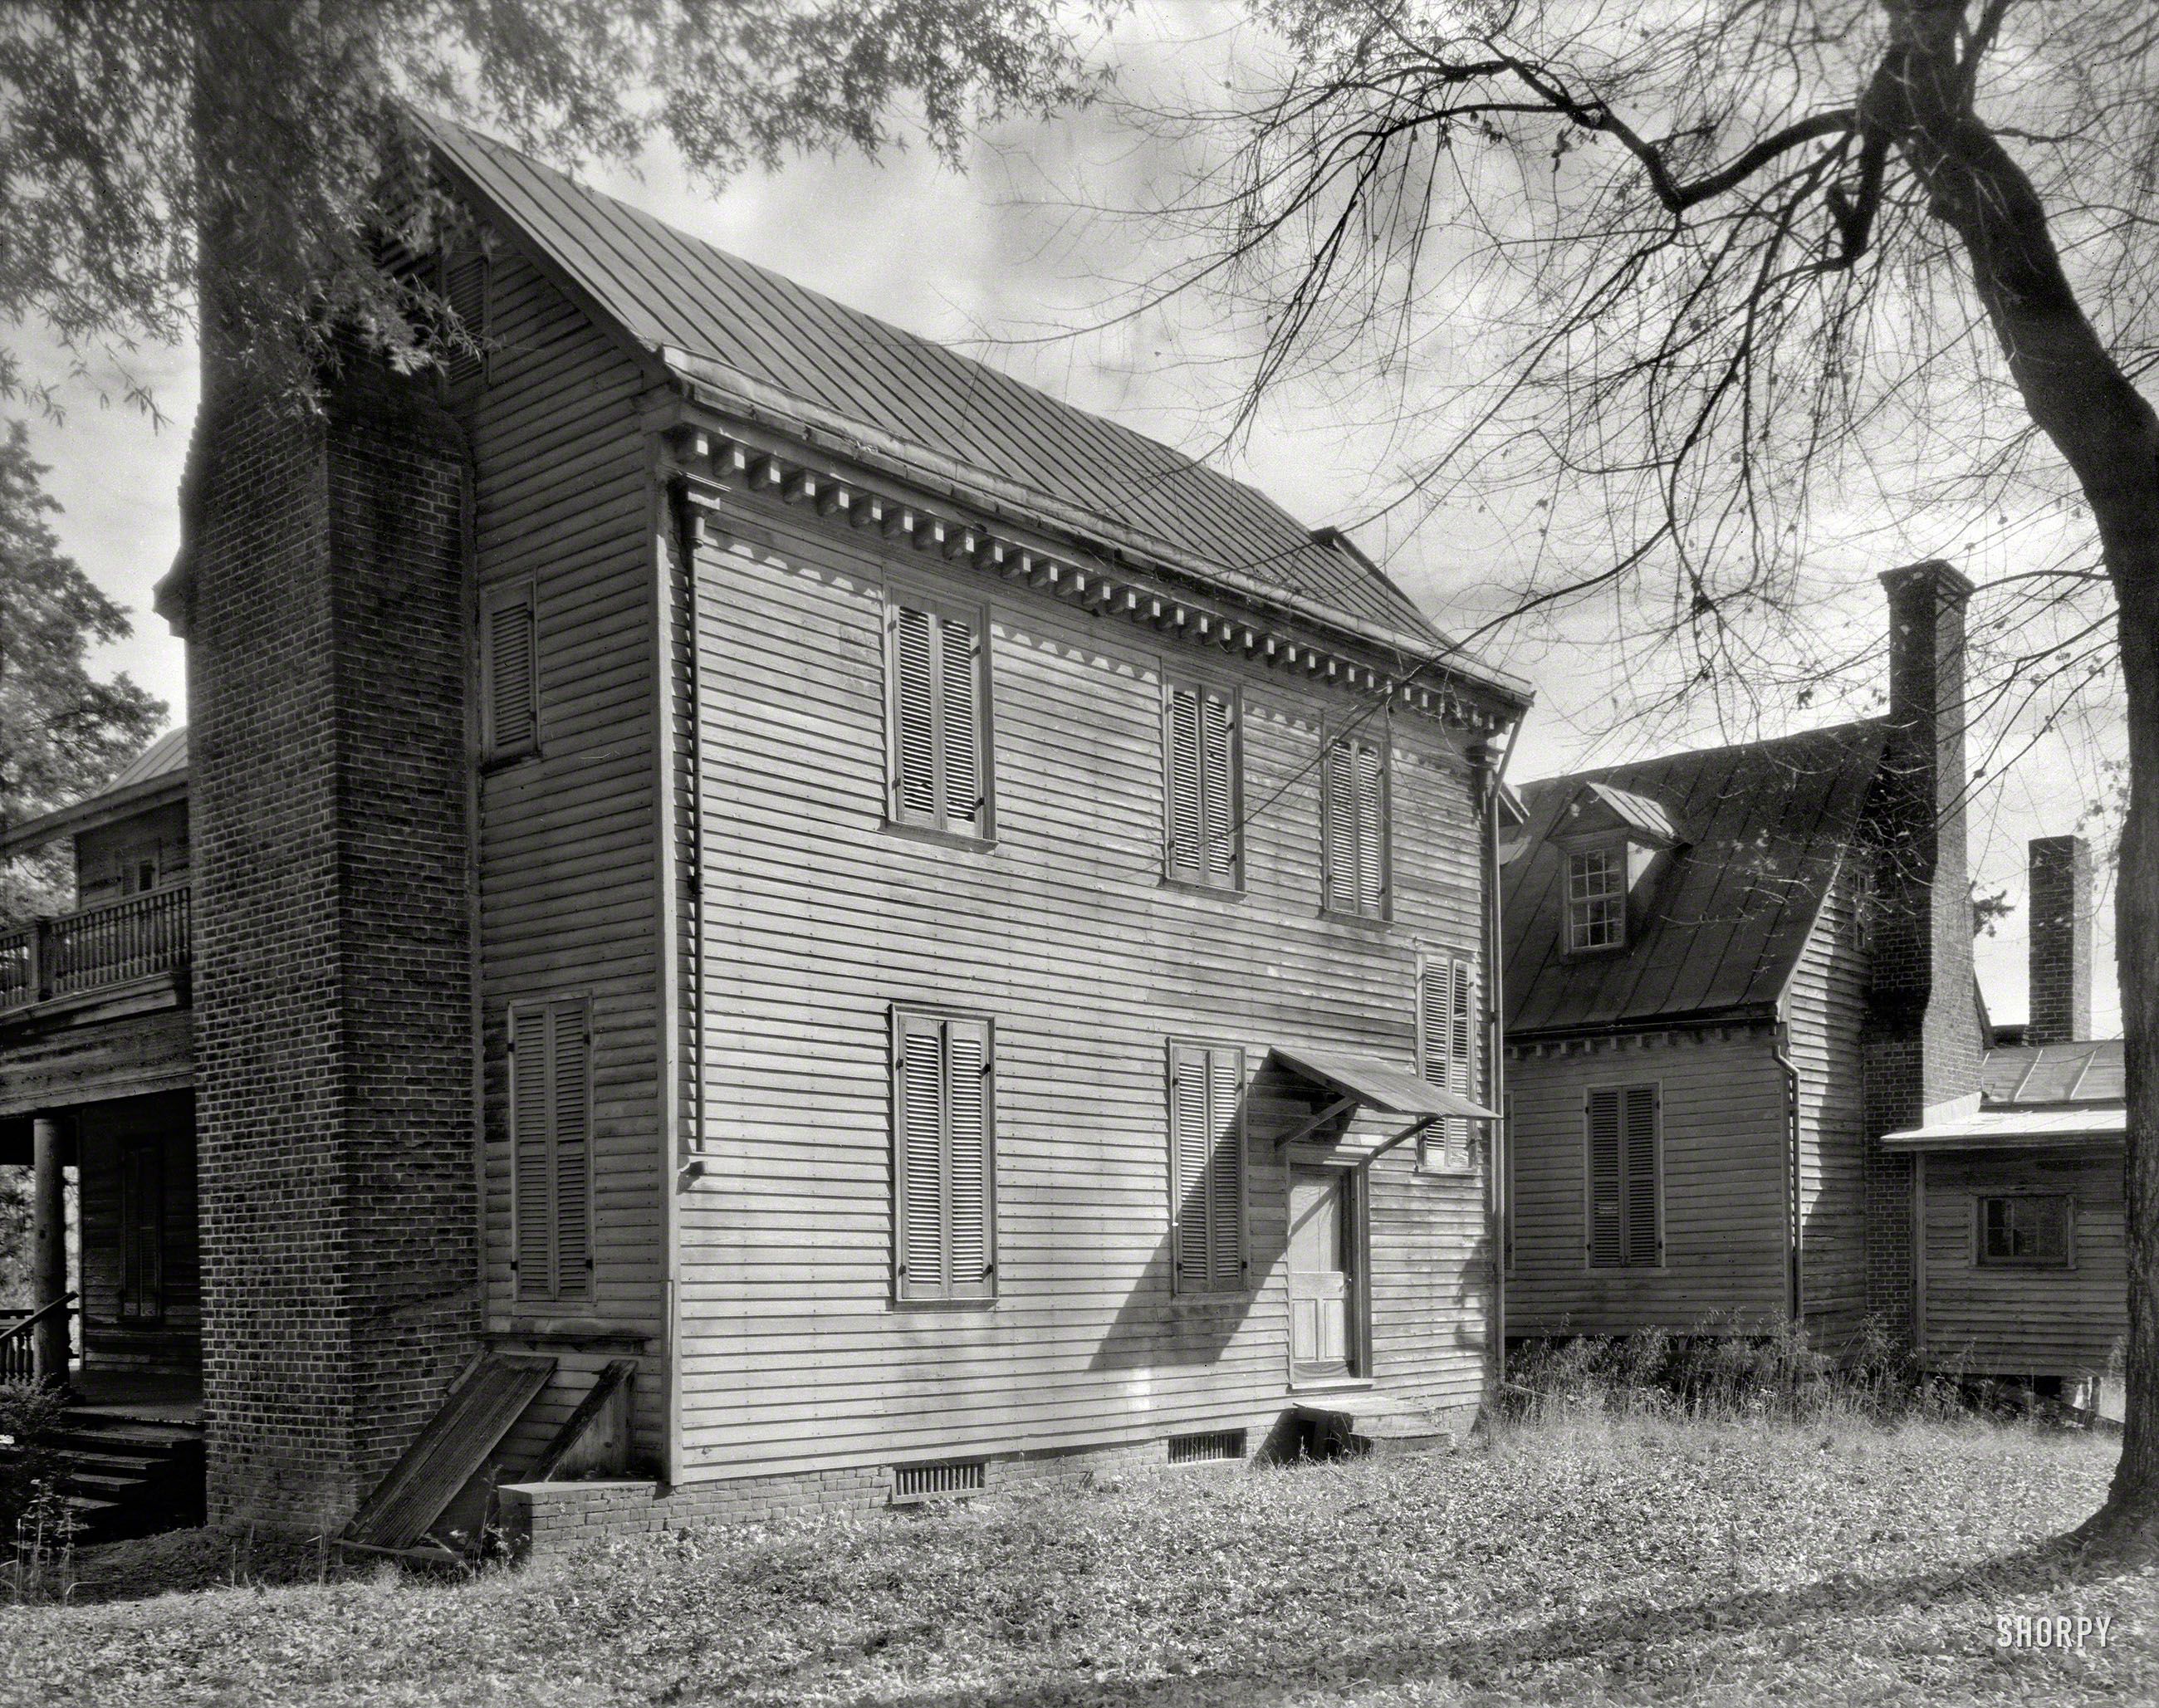 Pittsylvania County, Virginia, circa 1935. "Berry Hill, Danville vicinity. Related names: Mrs. Simms. Built in three units -- in 1776, in 1812, and in 1850 -- by the Perkins family. The later building was done under the direction of Maj. Wilson, who married Peter Perkins' granddaughter. Used as a hospital by Continental Army in 1781." 8x10 negative by Frances Benjamin Johnston. View full size.